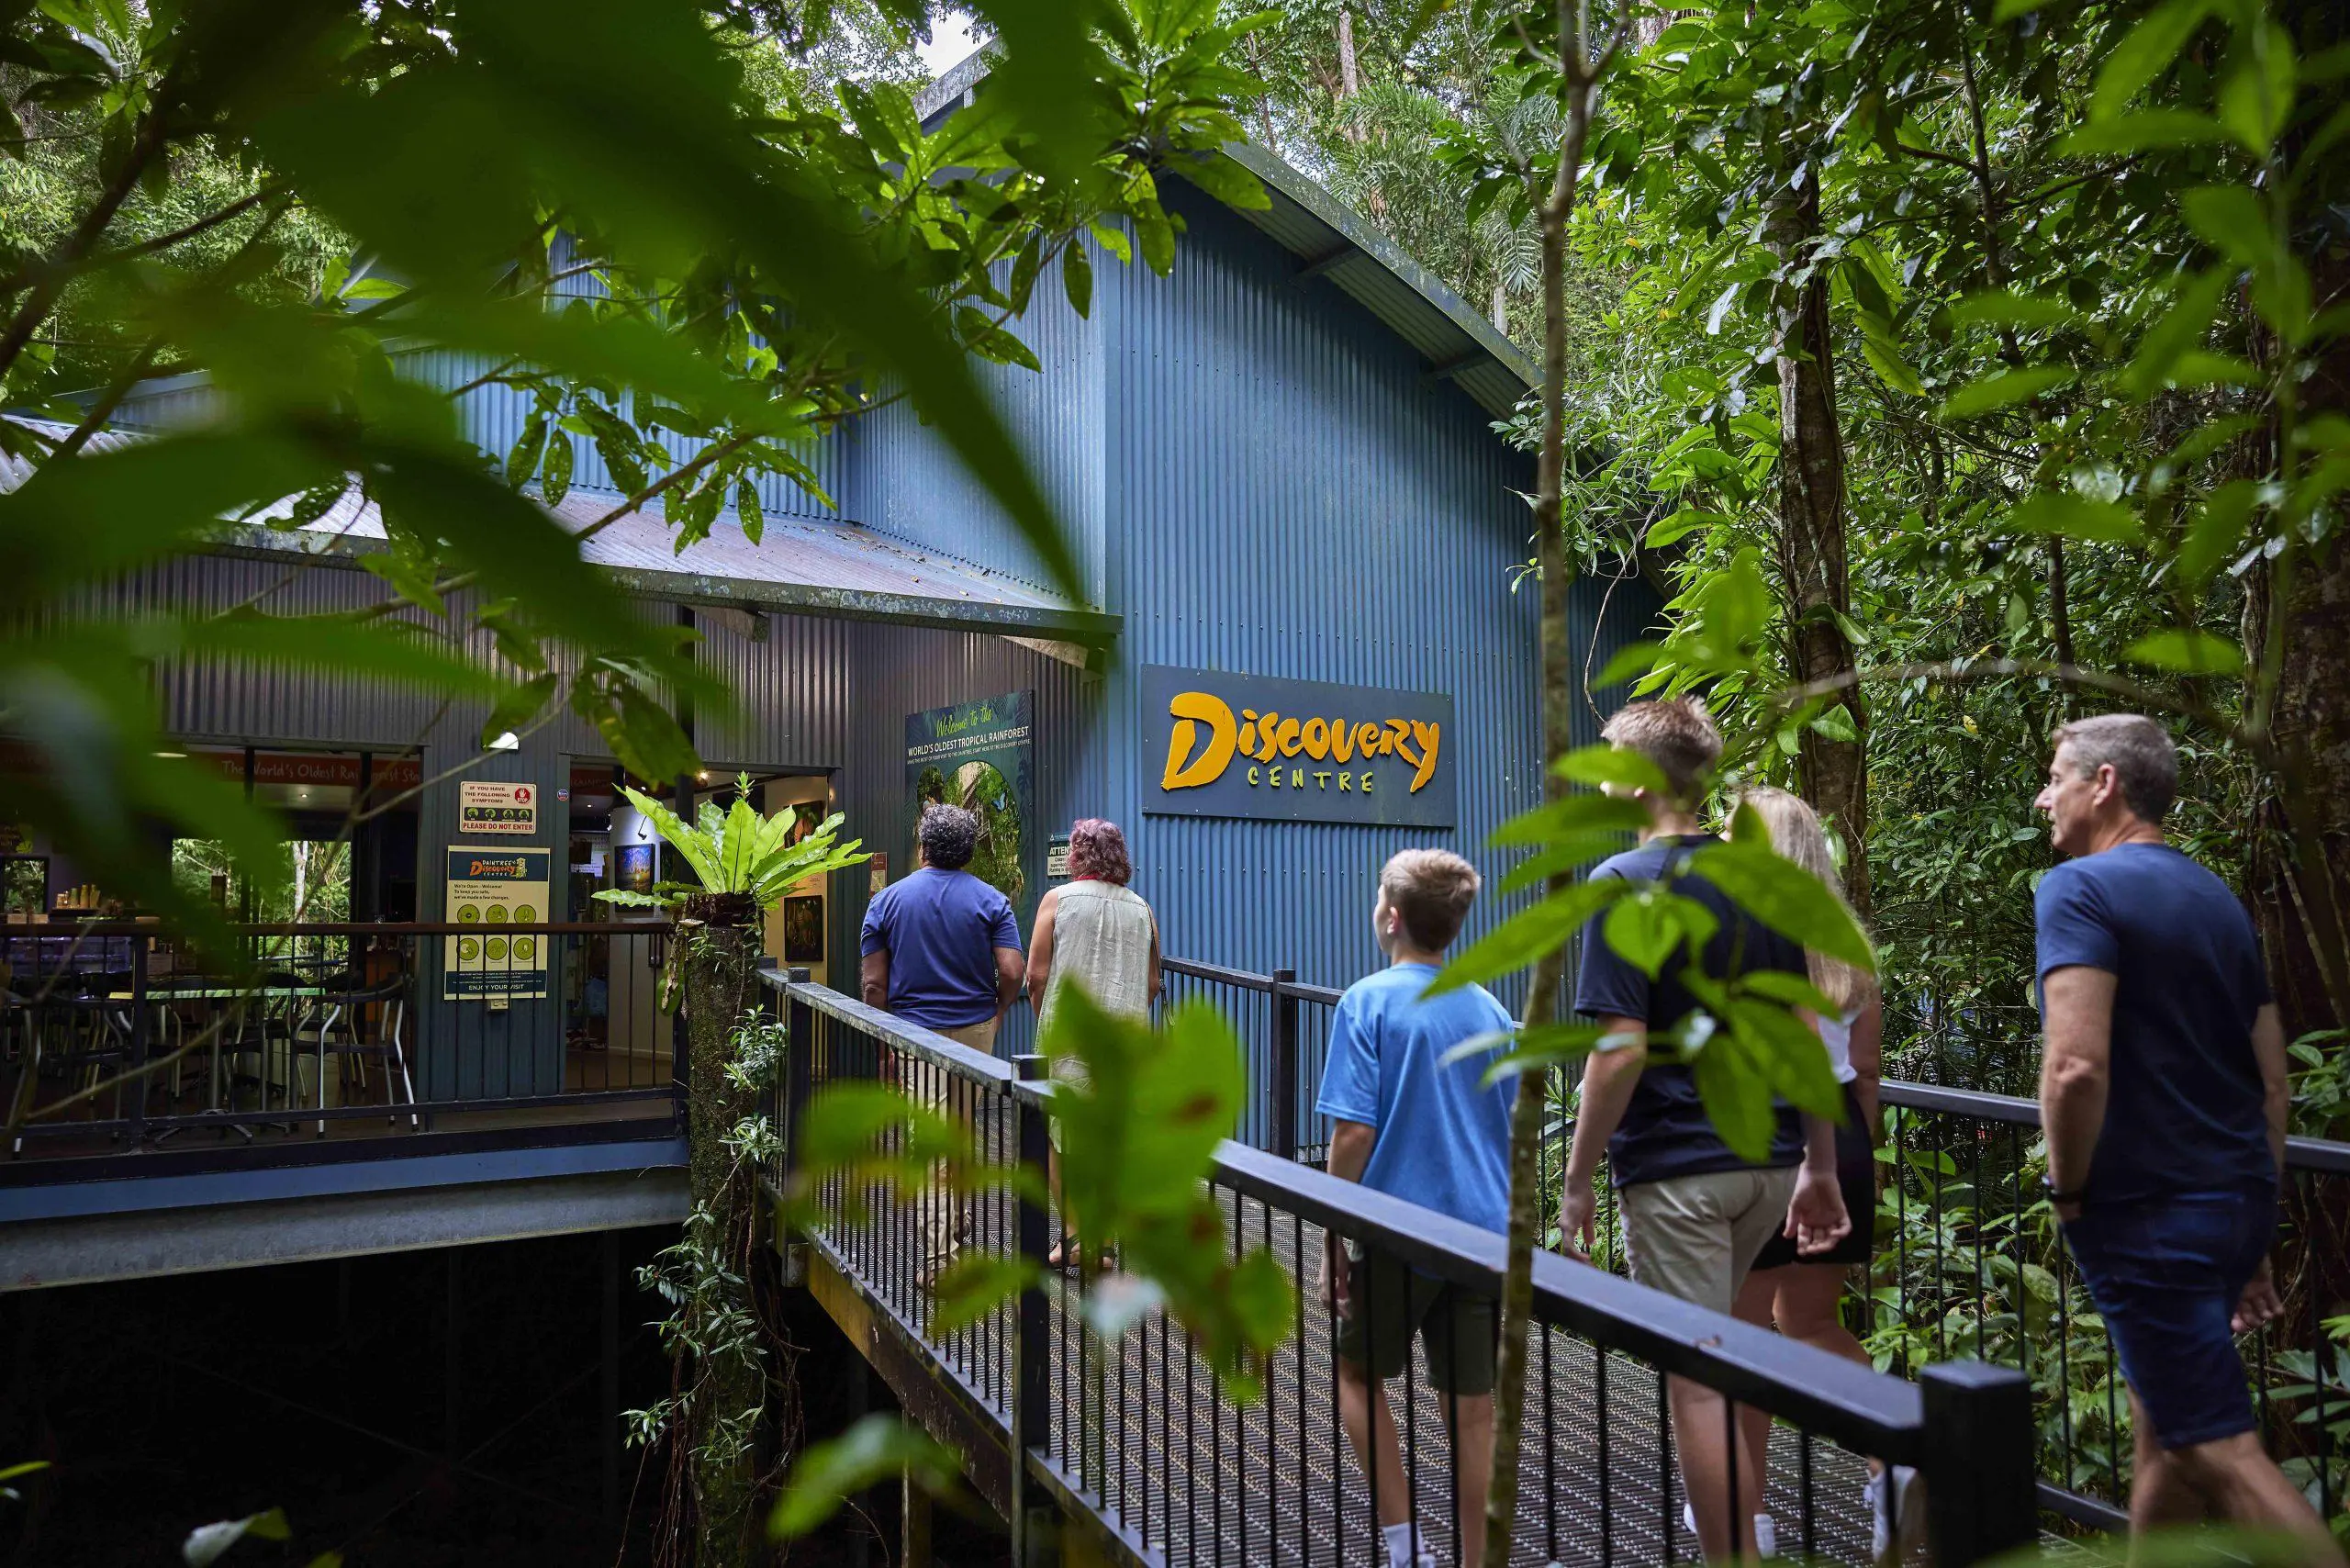 Visit the Daintree Discovery centre